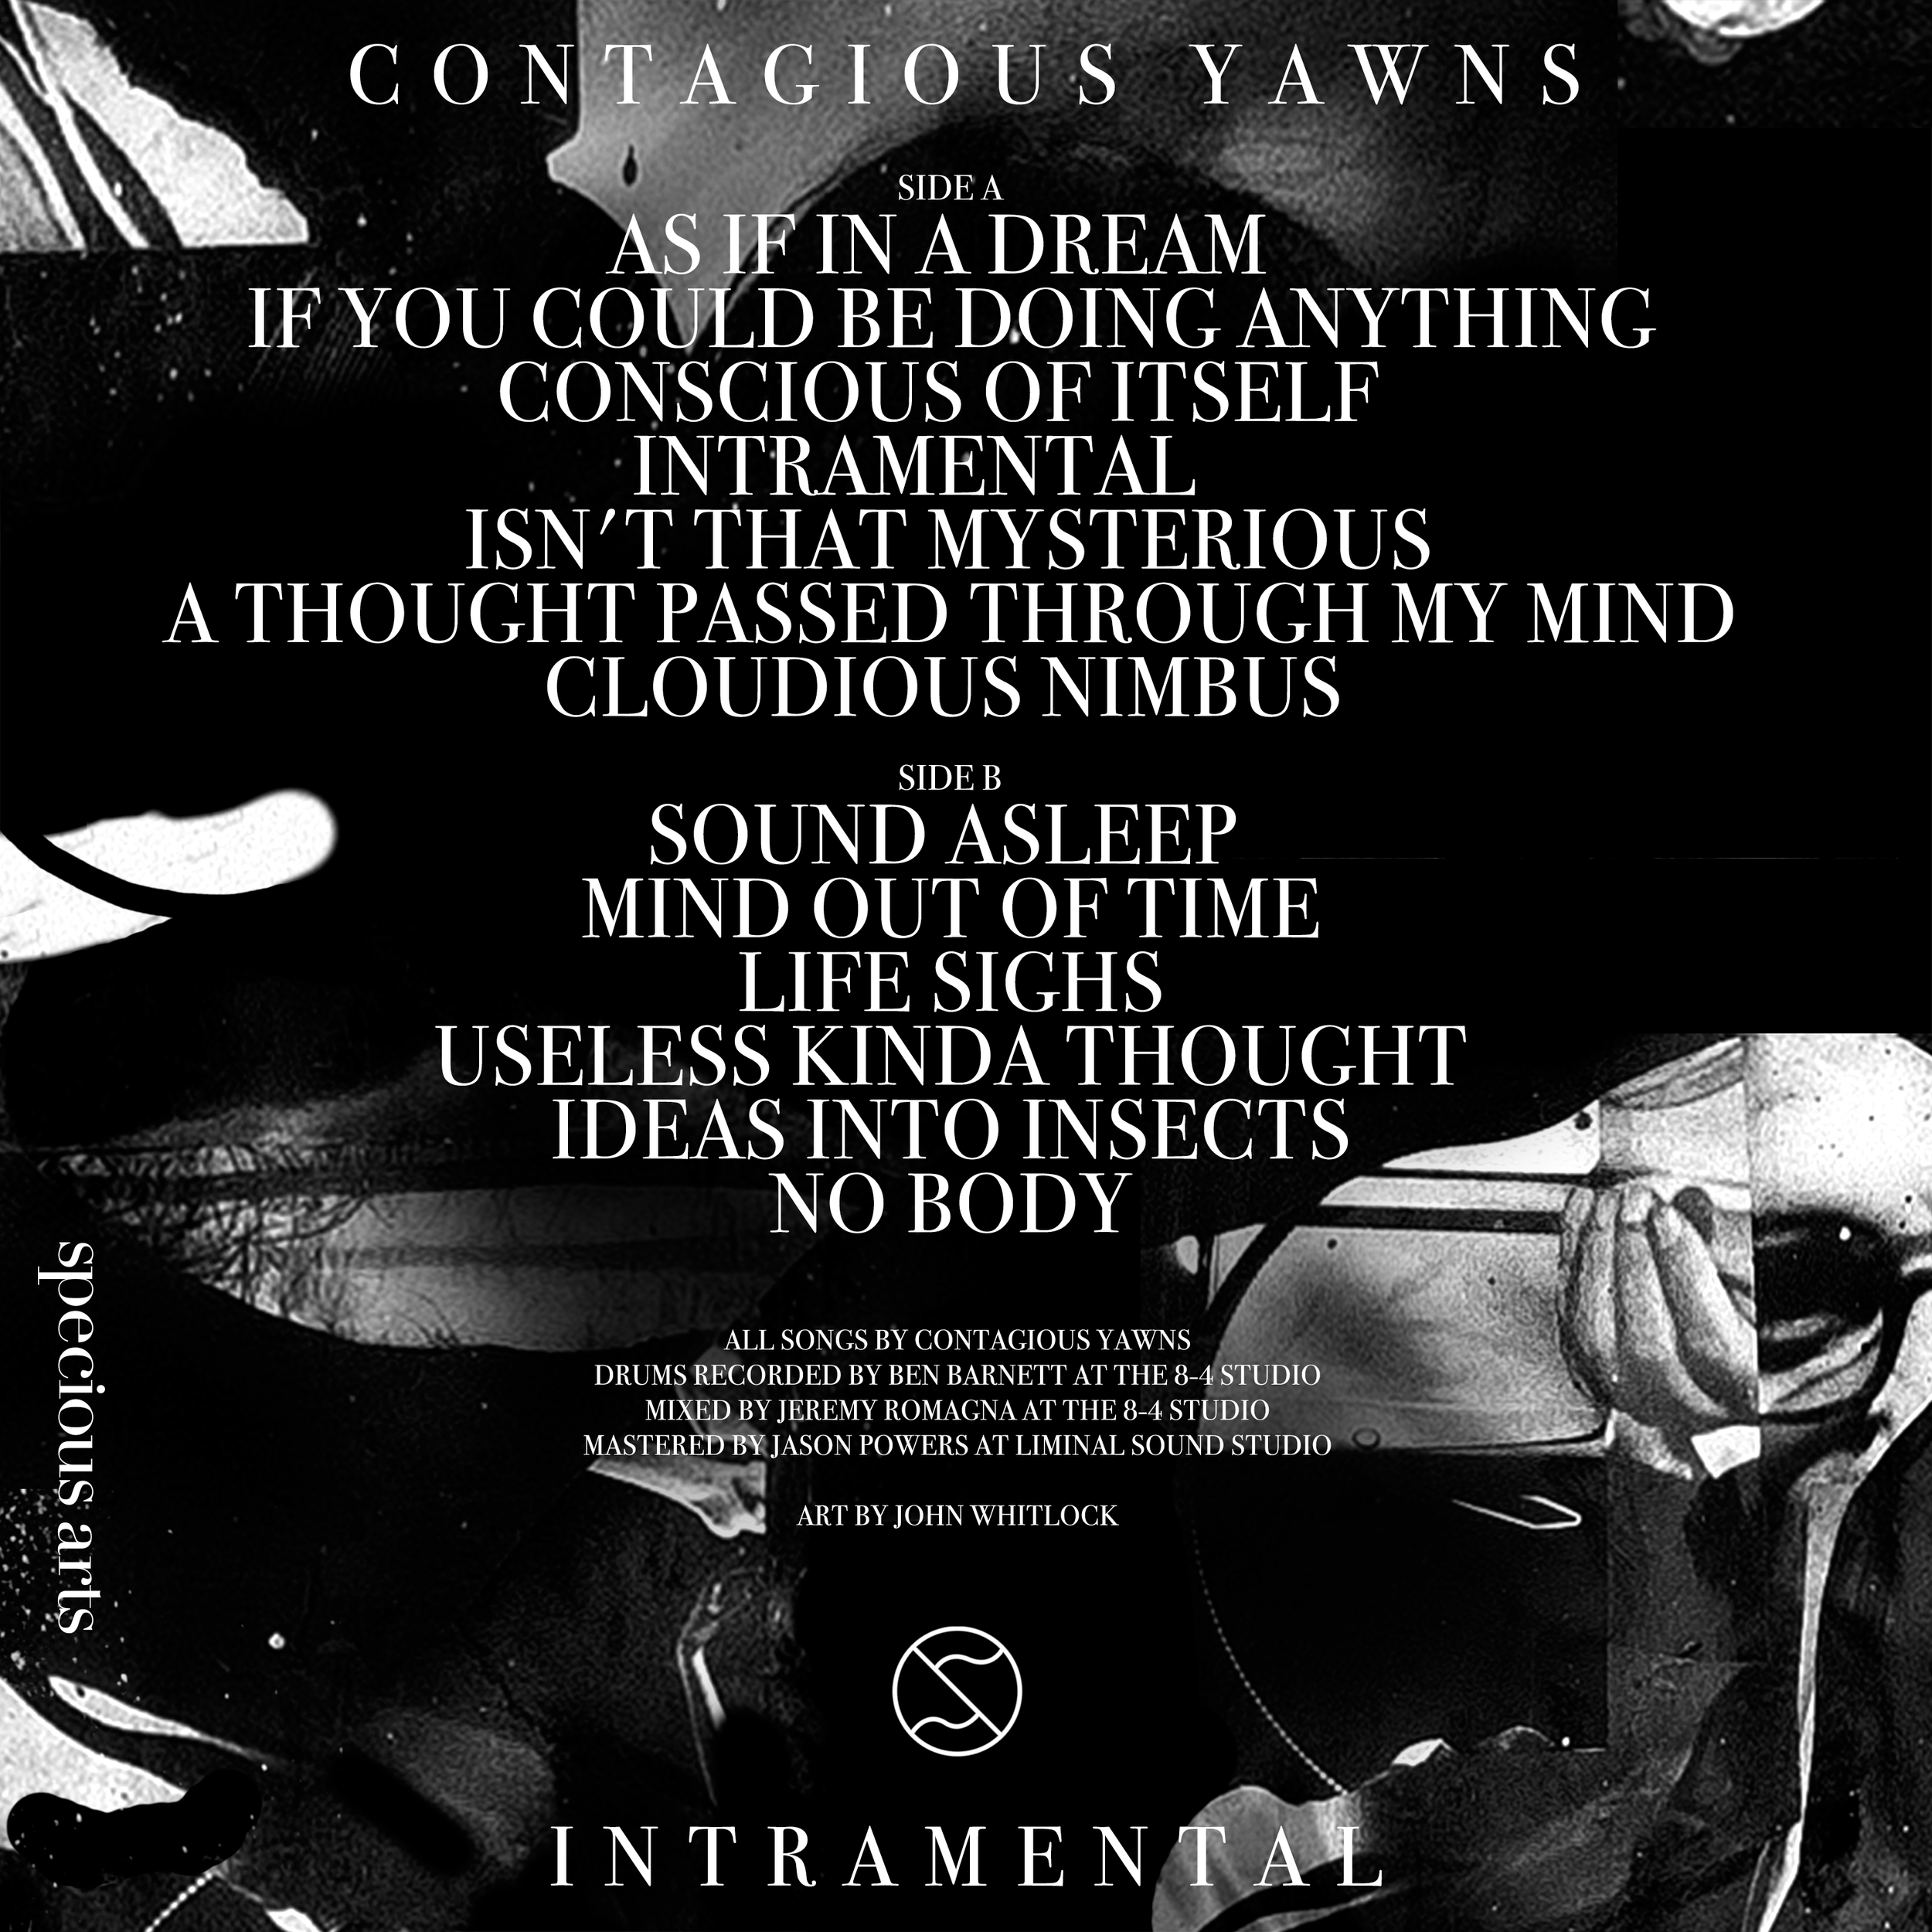 Contagious-Yawns-Intramental-Liner-Notes.png